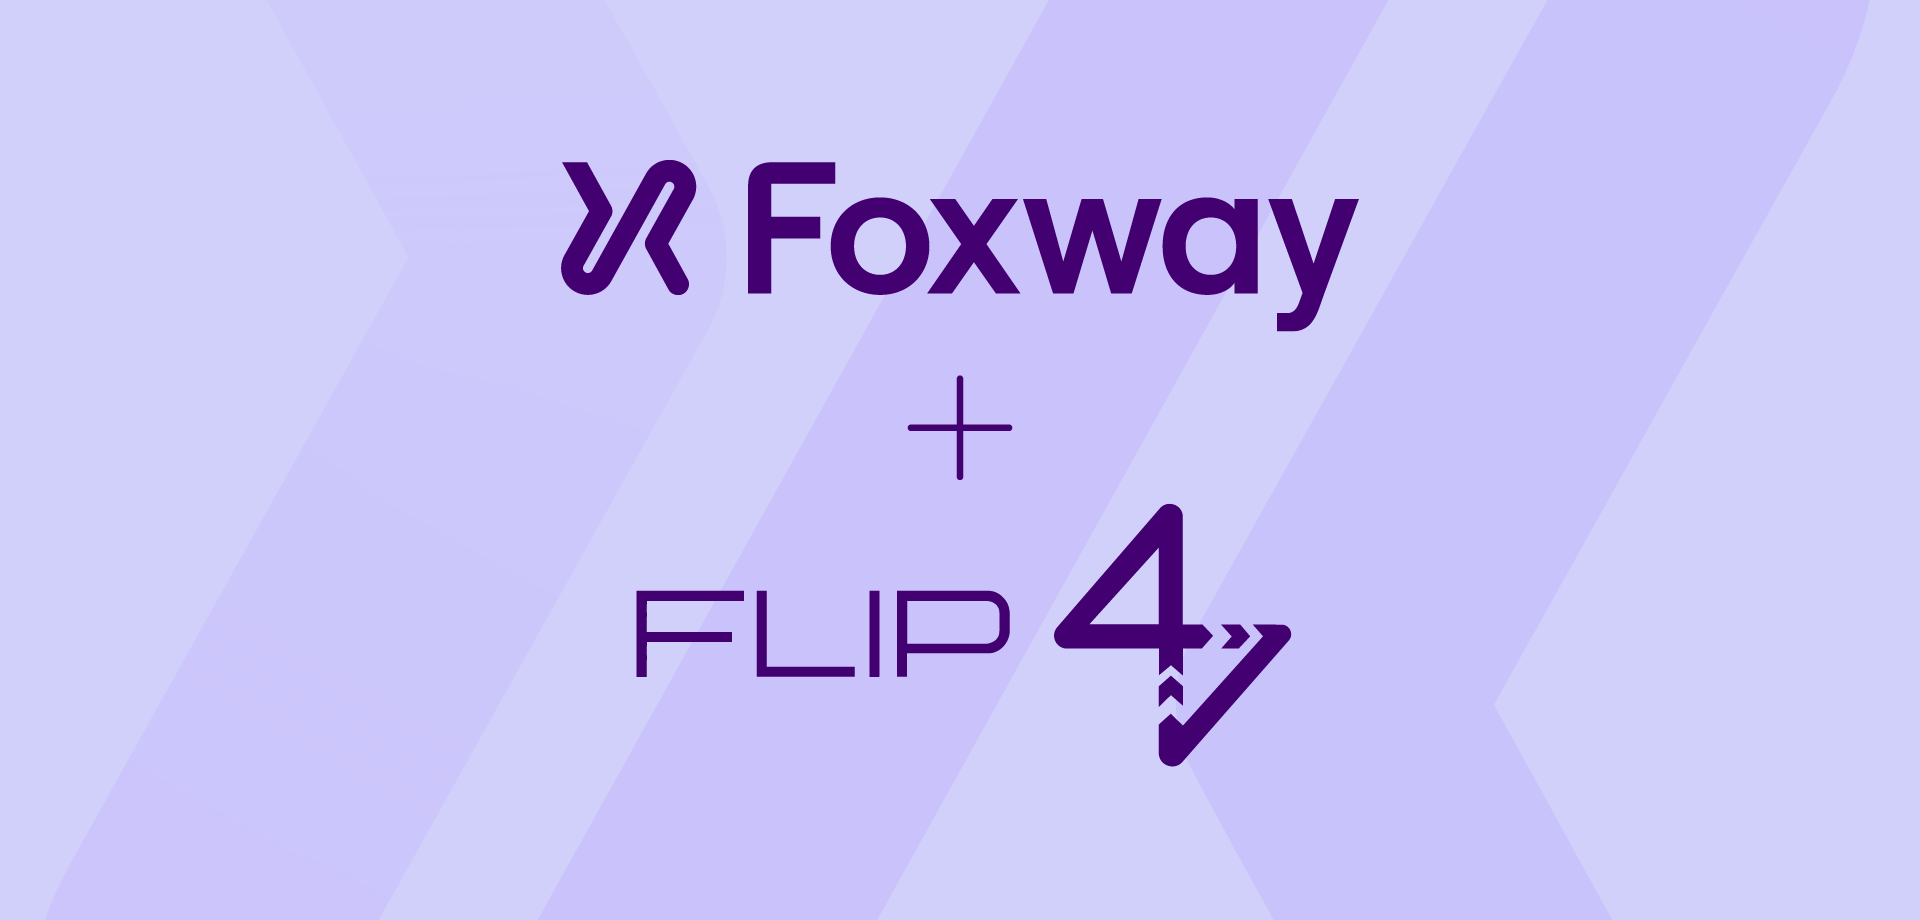 Foxway continues its European expansion and entering Germany by acquiring FLIP4NEW - Foxway